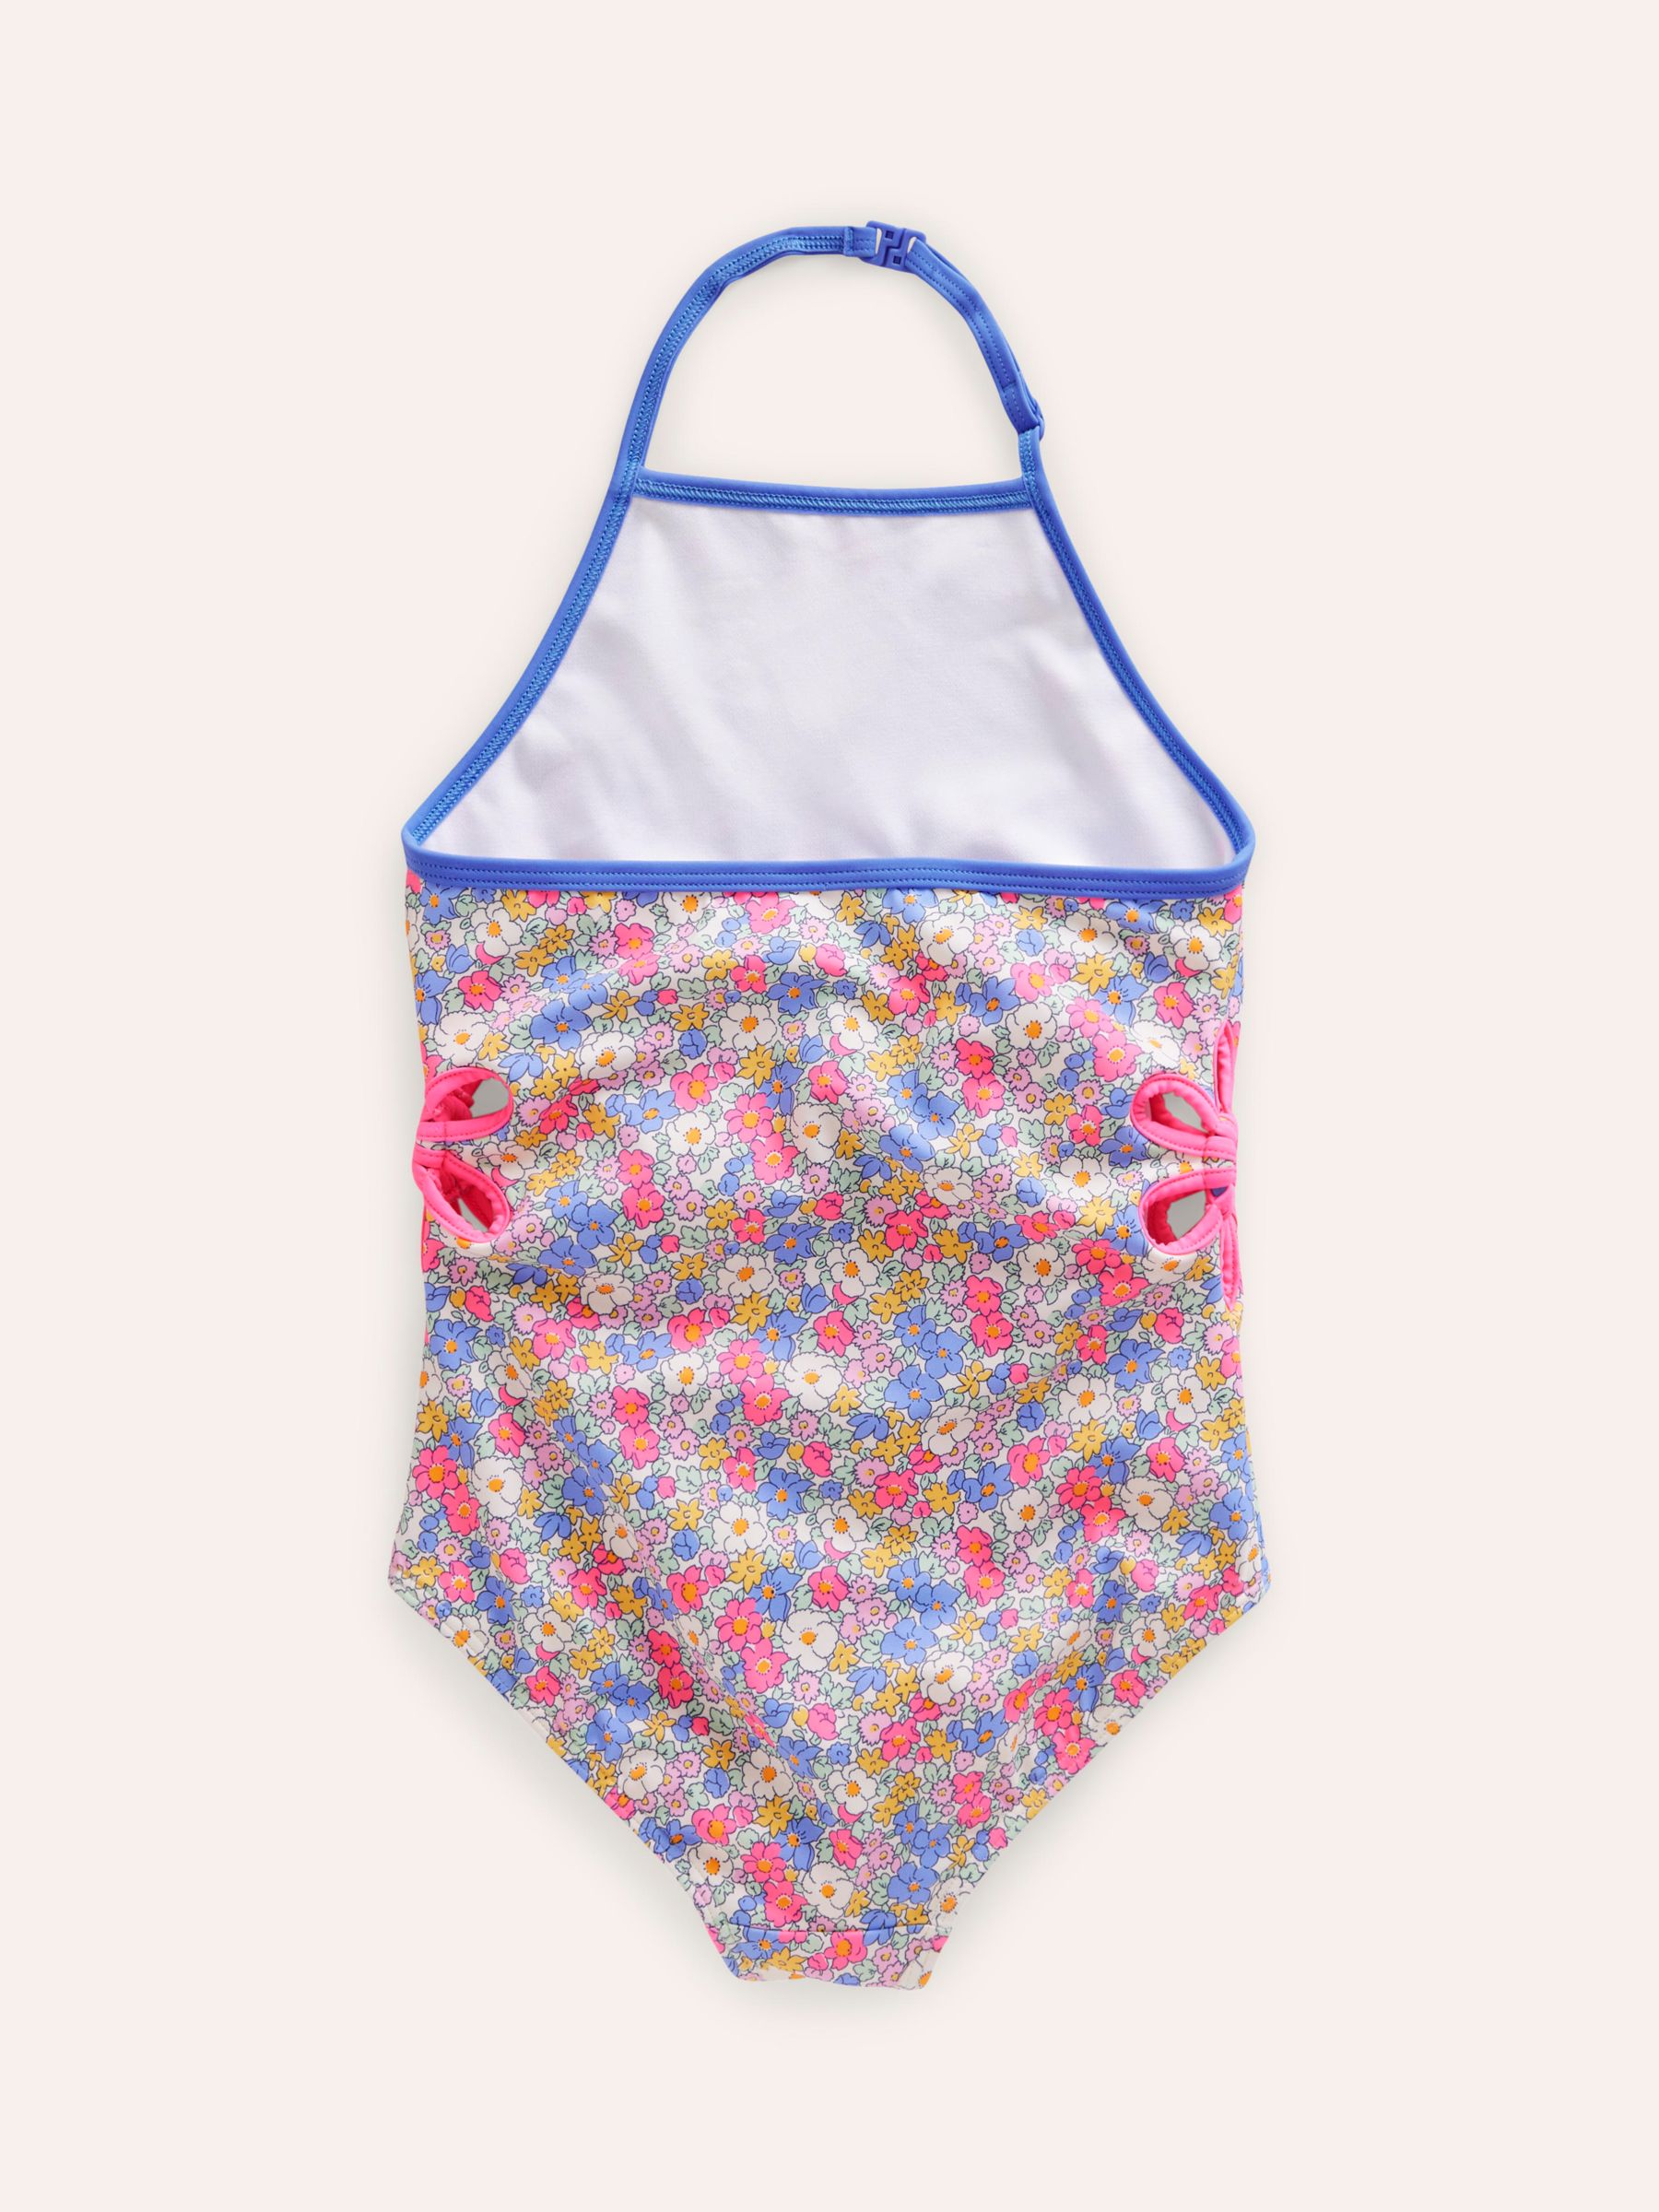 Mini Boden Kids' Cut Out Flower Halter Swimsuit, Pink Nautical Floral, 2-3 years